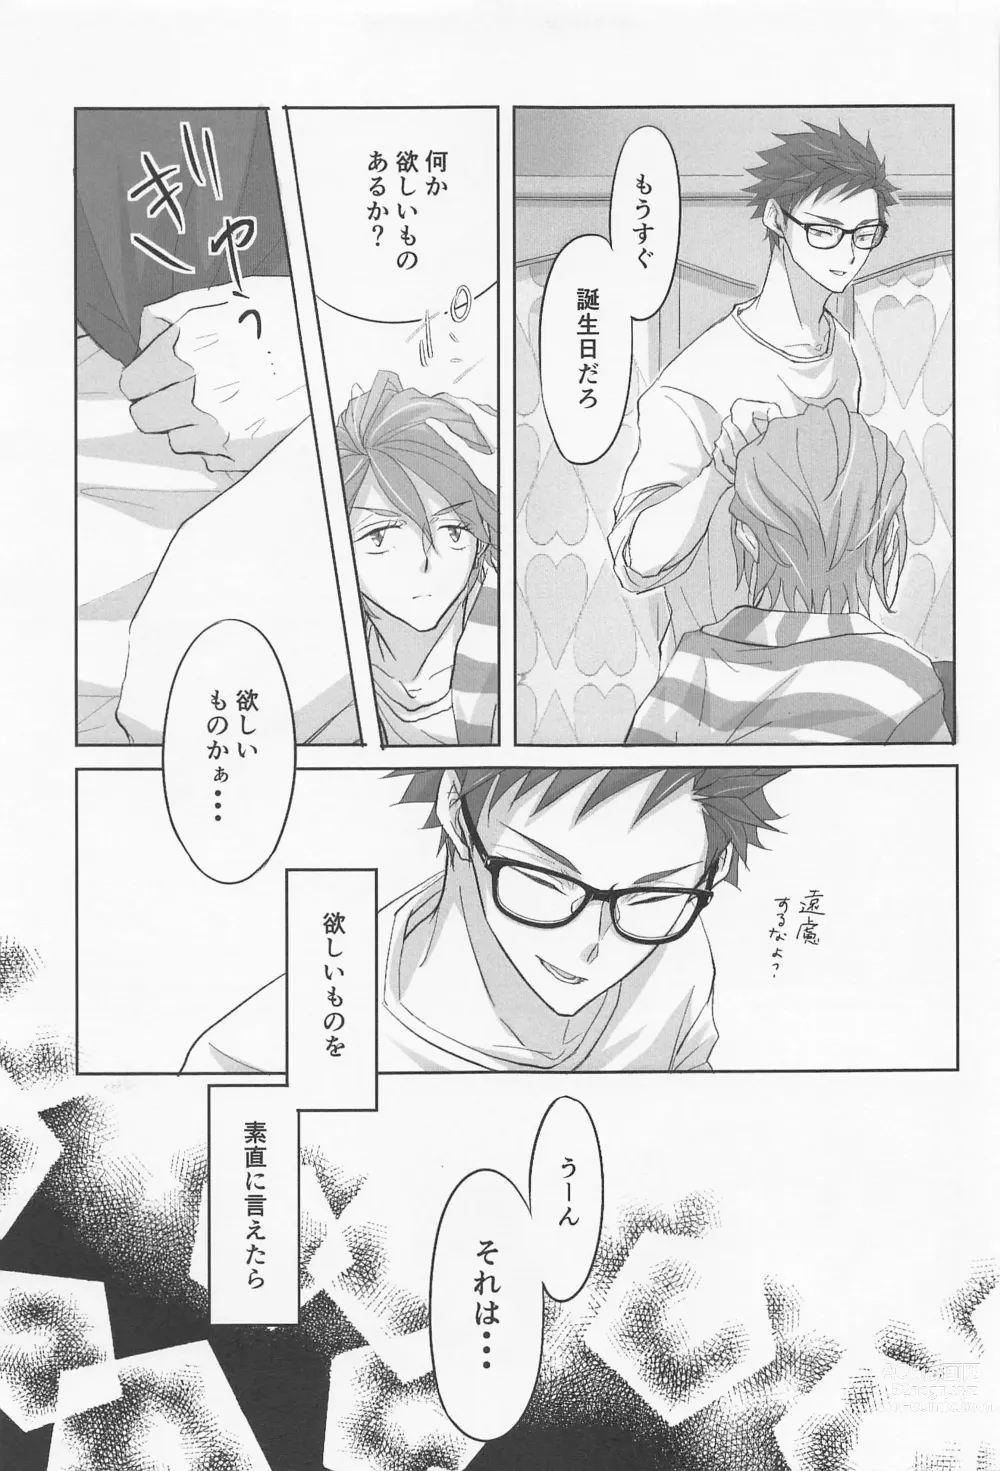 Page 14 of doujinshi My heart dedicated to you